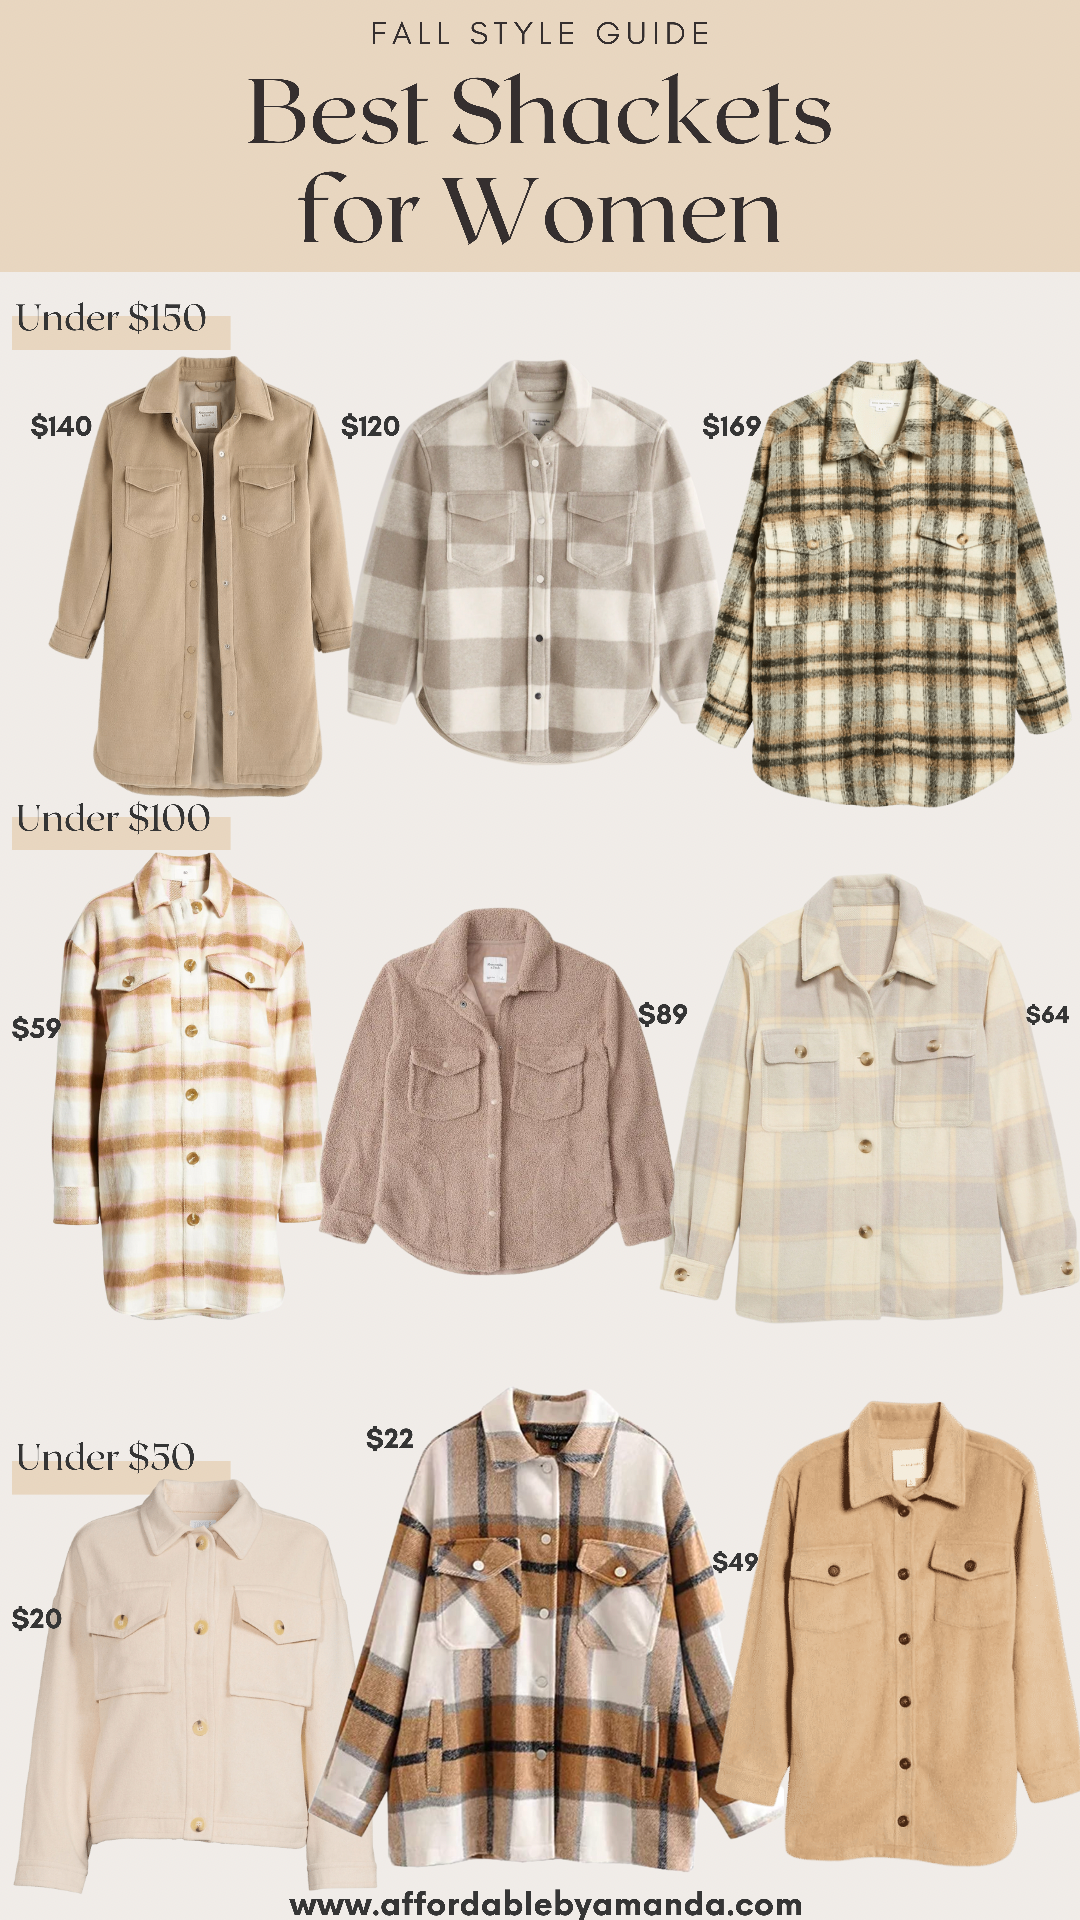 Shacket Trend 2021 | Best Shirt Jacket for Women 2021 | Fall 2021 Fashion Trends | How to Wear a Shacket in the Fall 